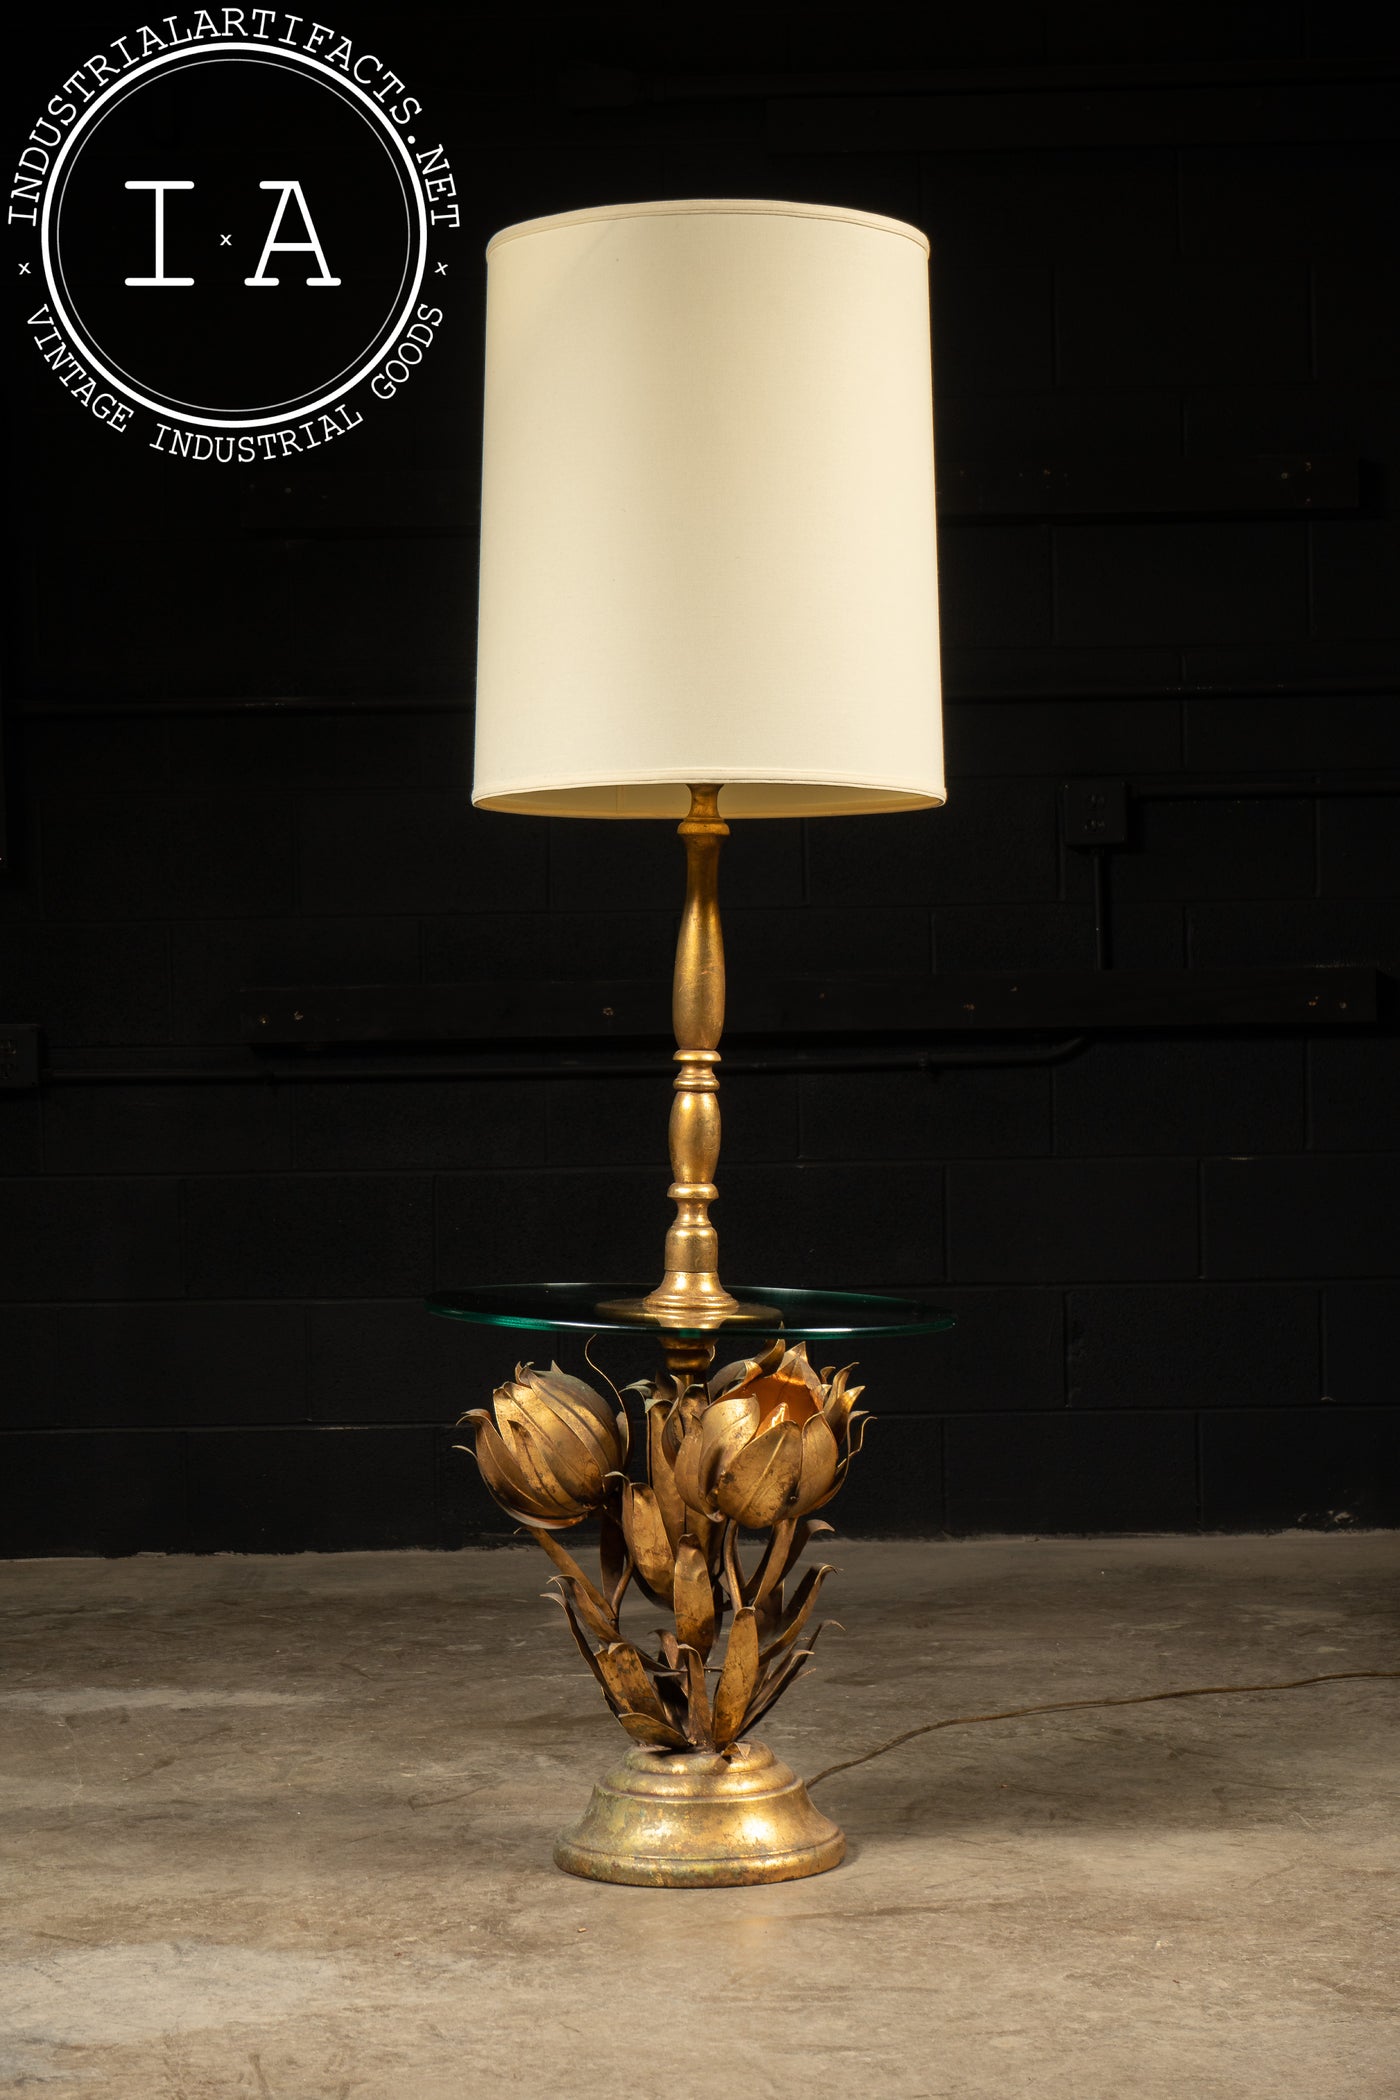 Vintage Hollywood Regency Lamp Table With Rose Lamps